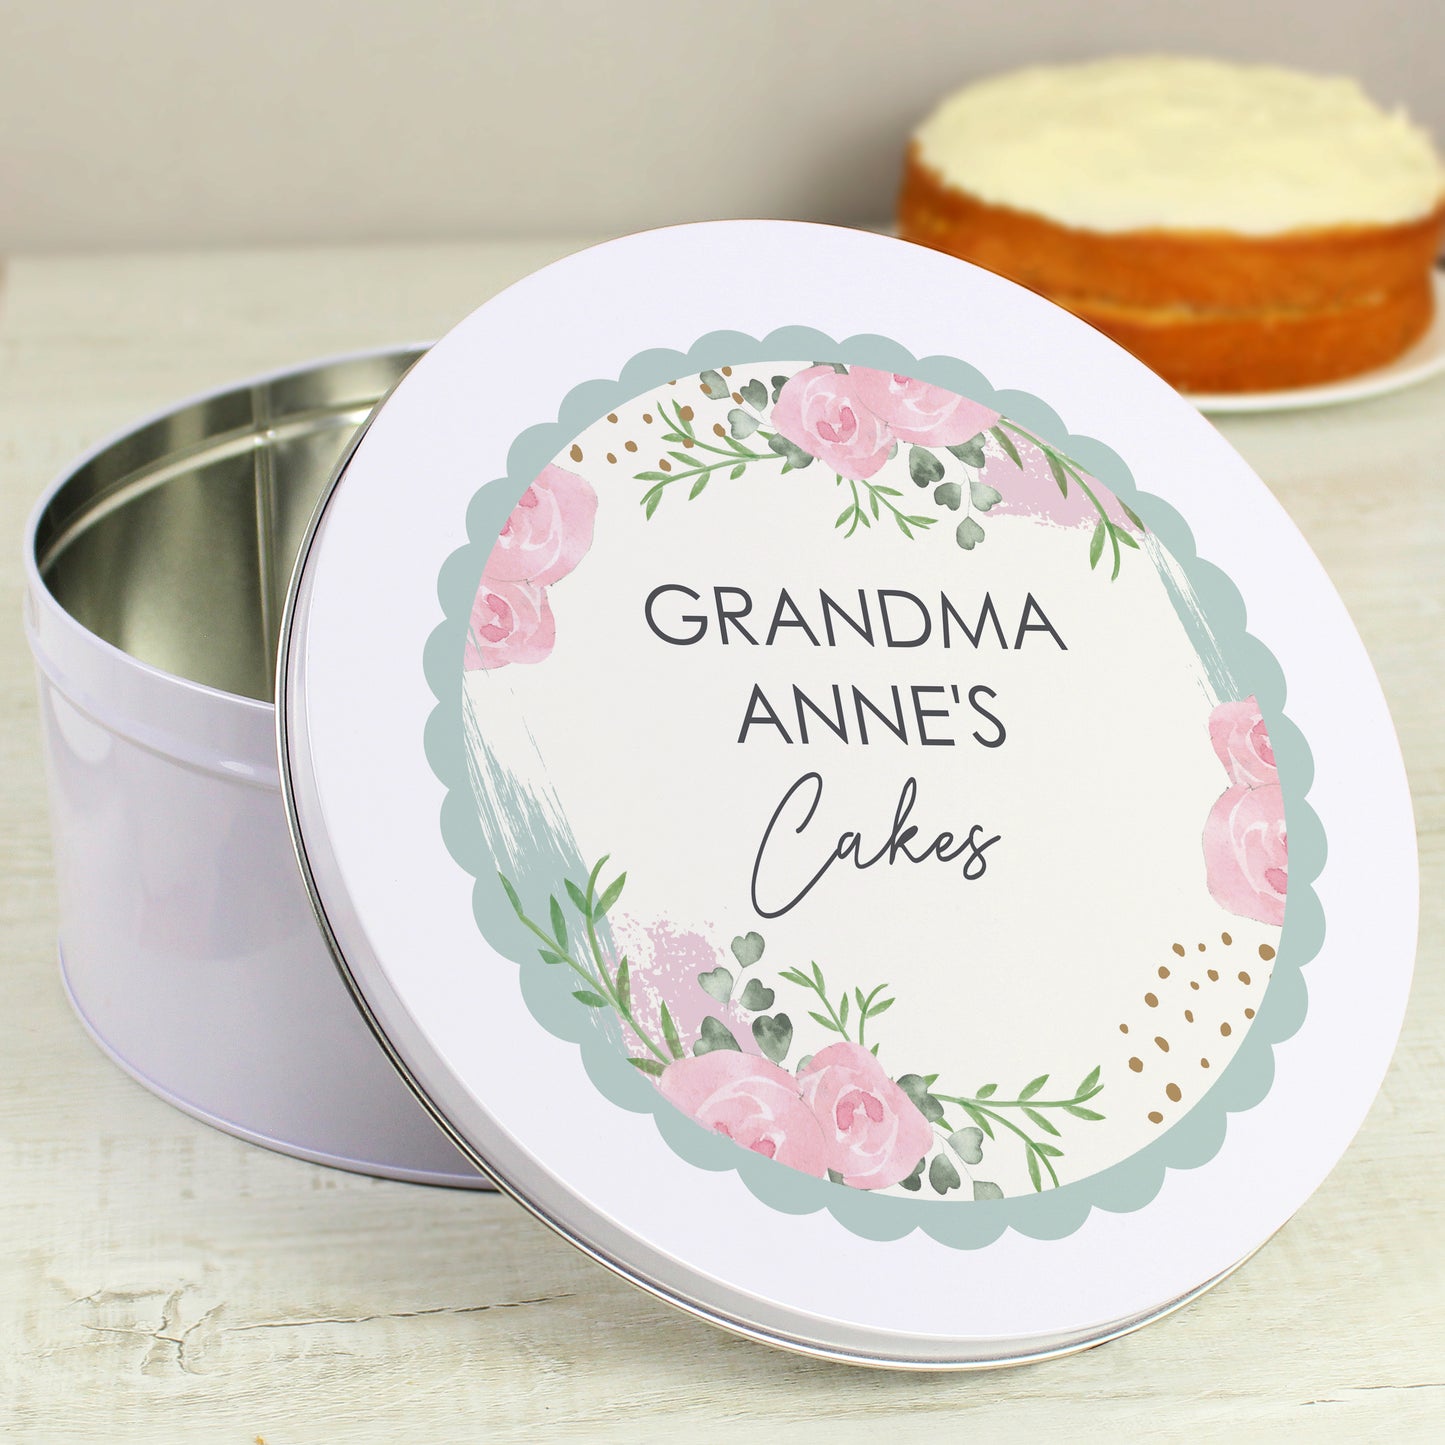 Personalised Floral Cake Tin that says "GRANDMA ANNE'S Cakes"